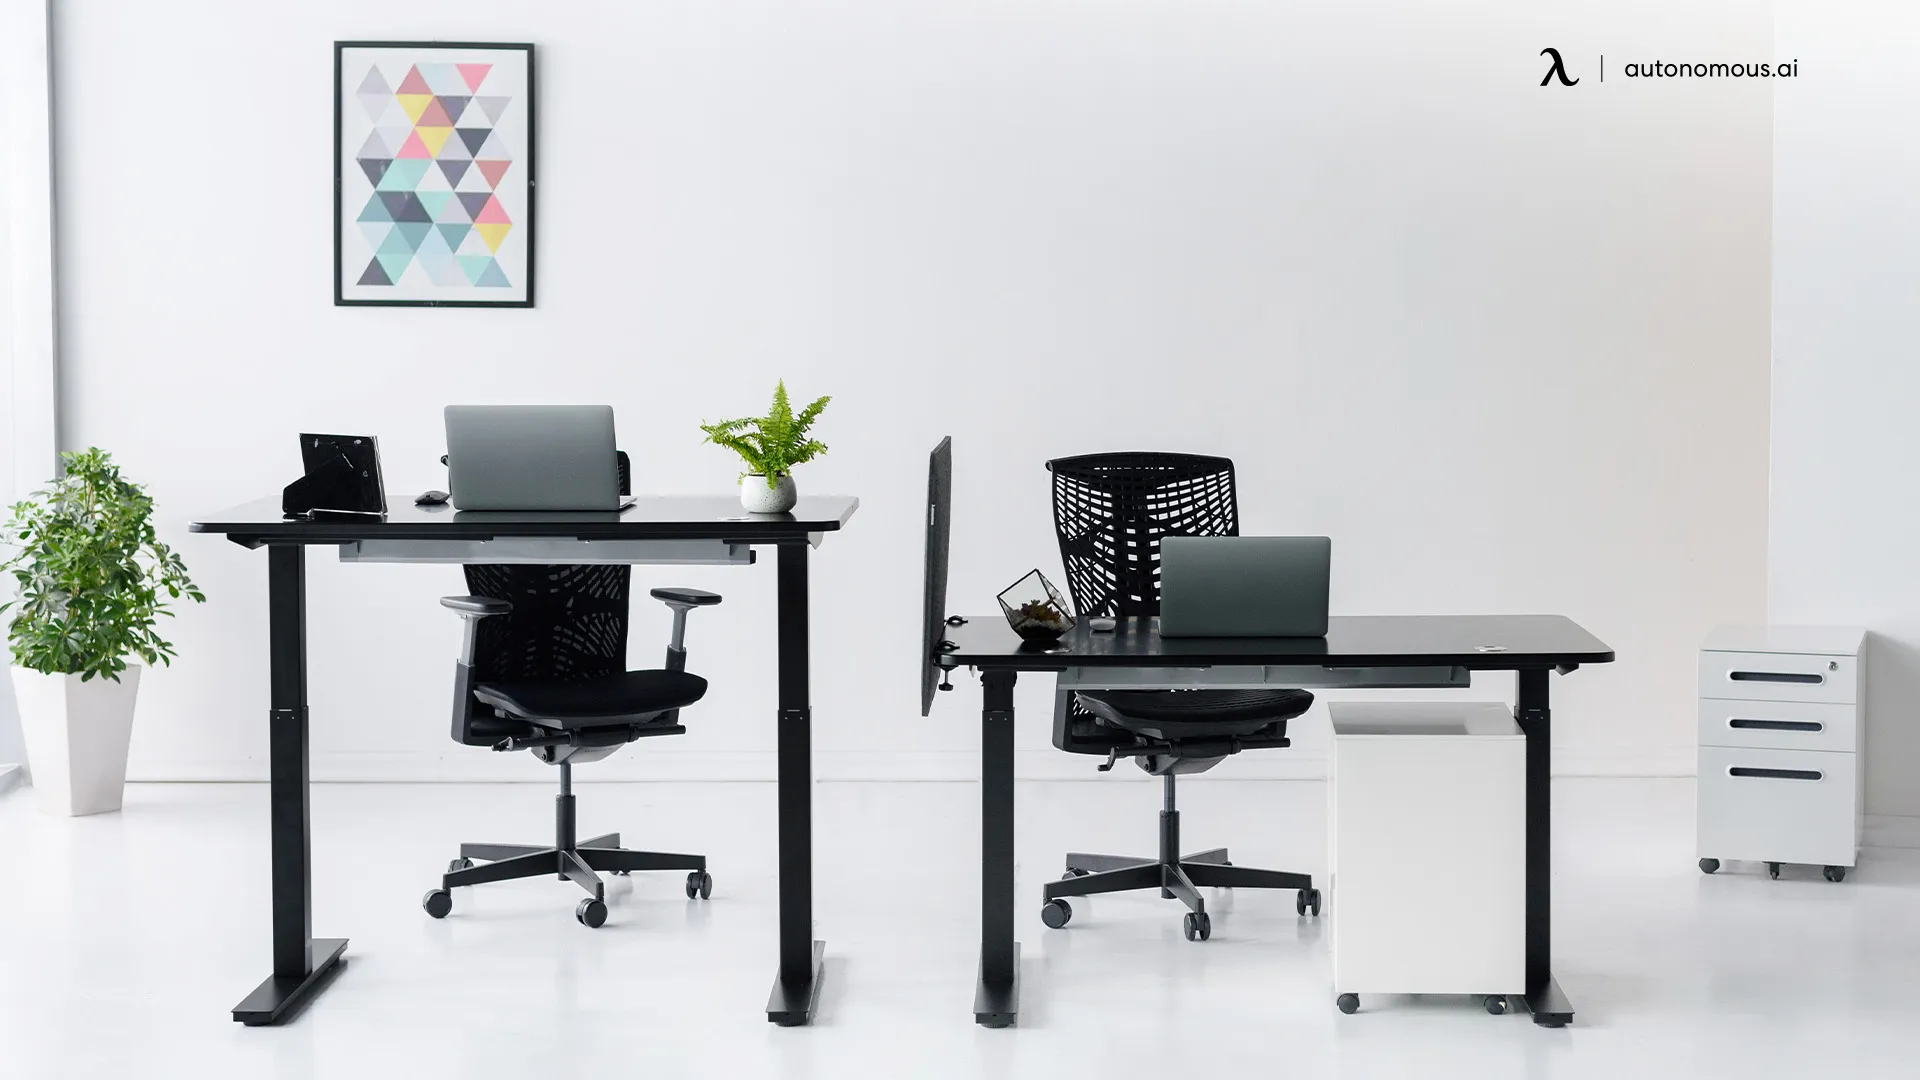 Prioritizing High-quality Ergonomic Furniture for Long-term Usage and Comfort